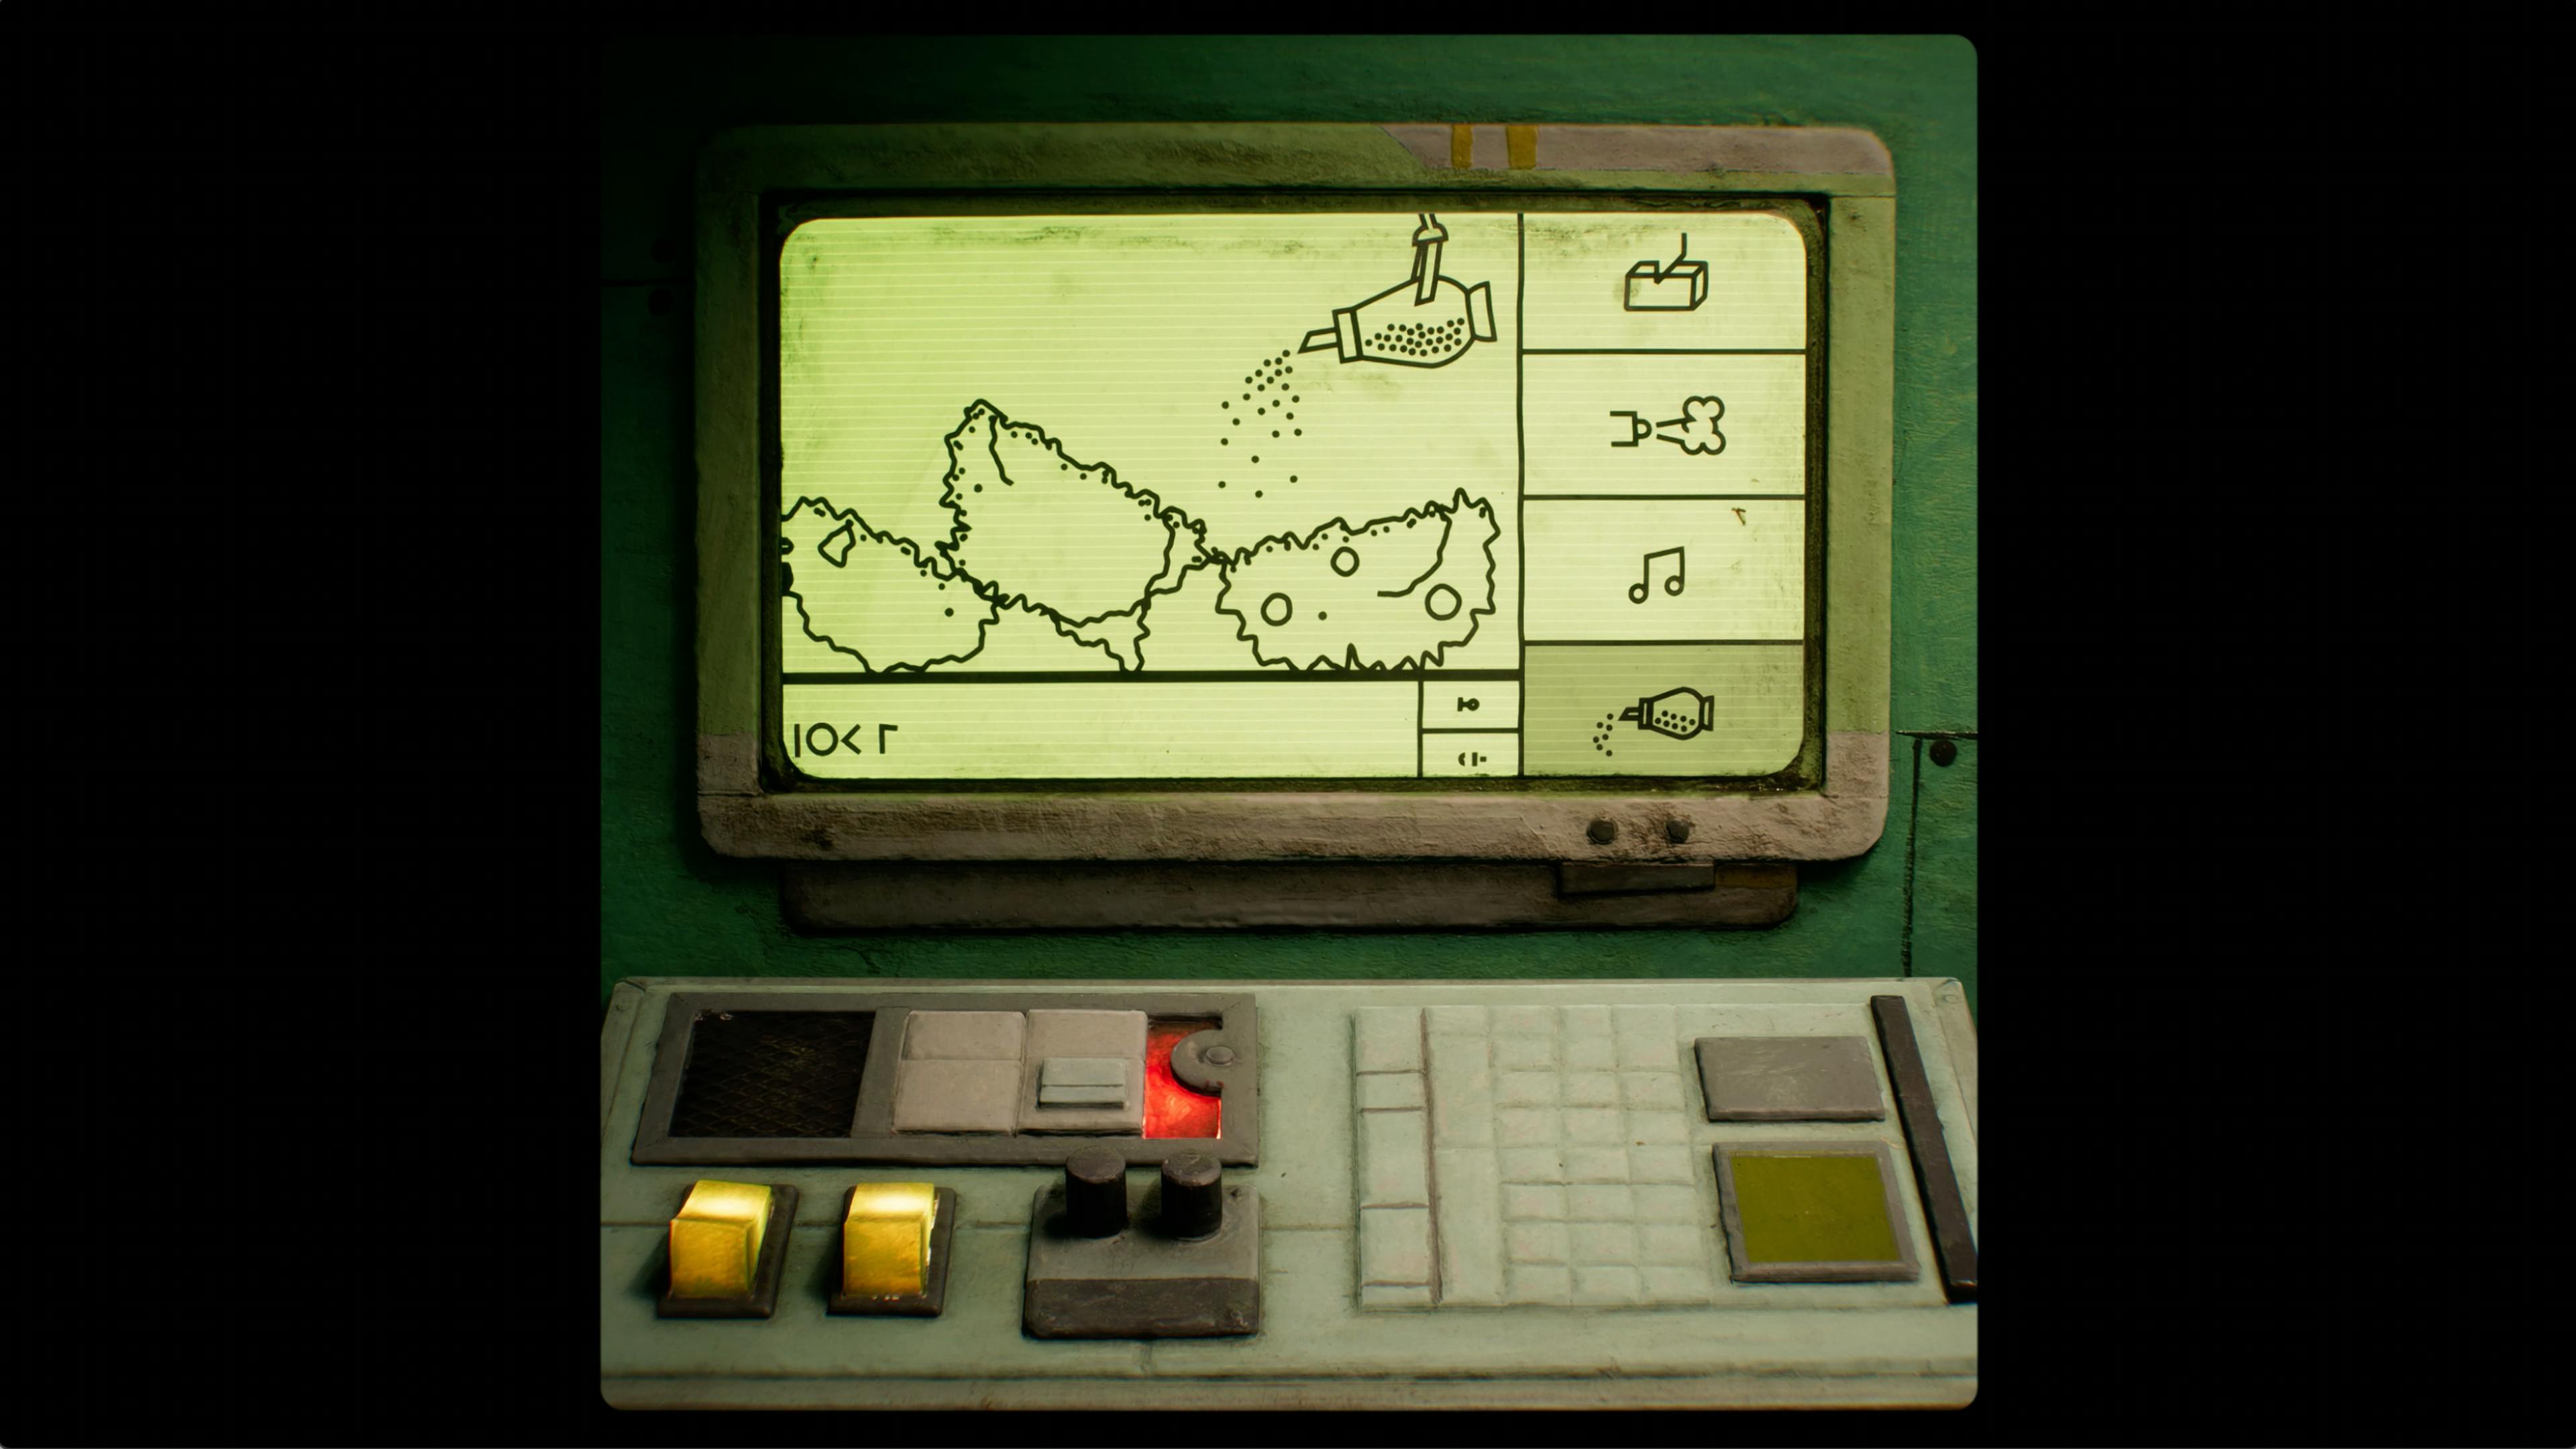 Mini game that involved selecting sugar to pour onto a rock sample. It's represented by simple lined drawings on the computer screen.